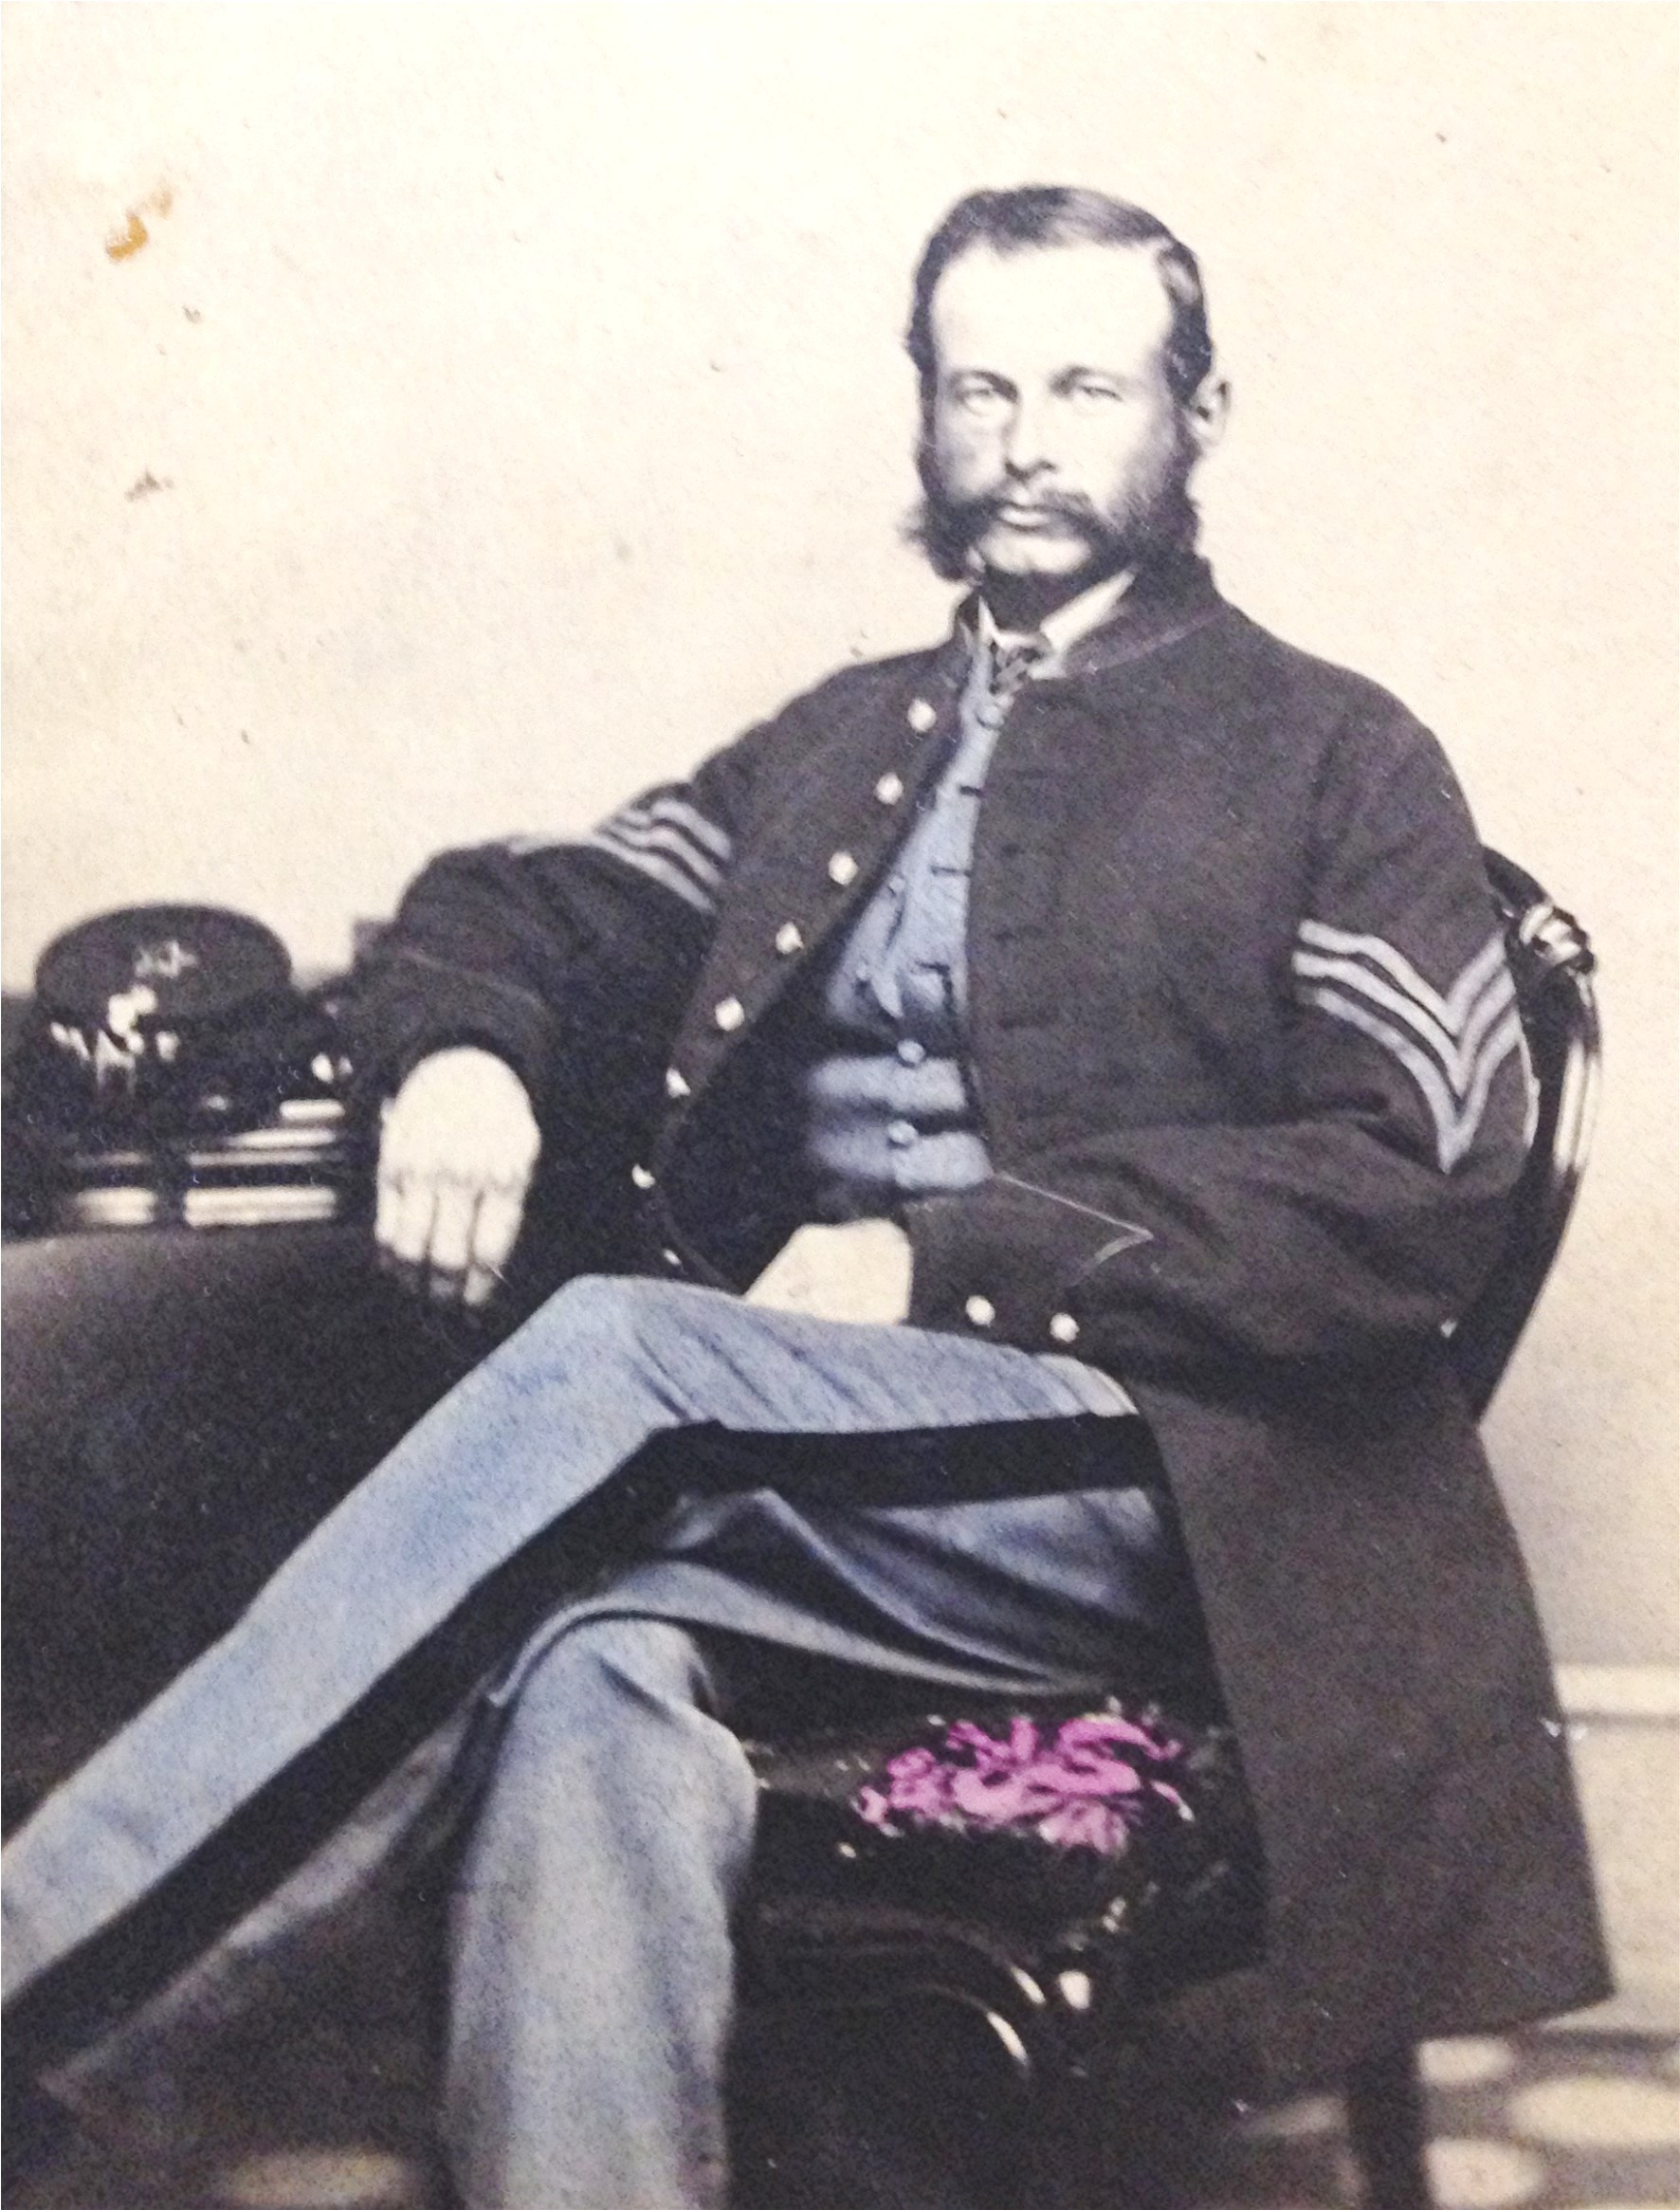 image of Sgt. John Emerson Anderson